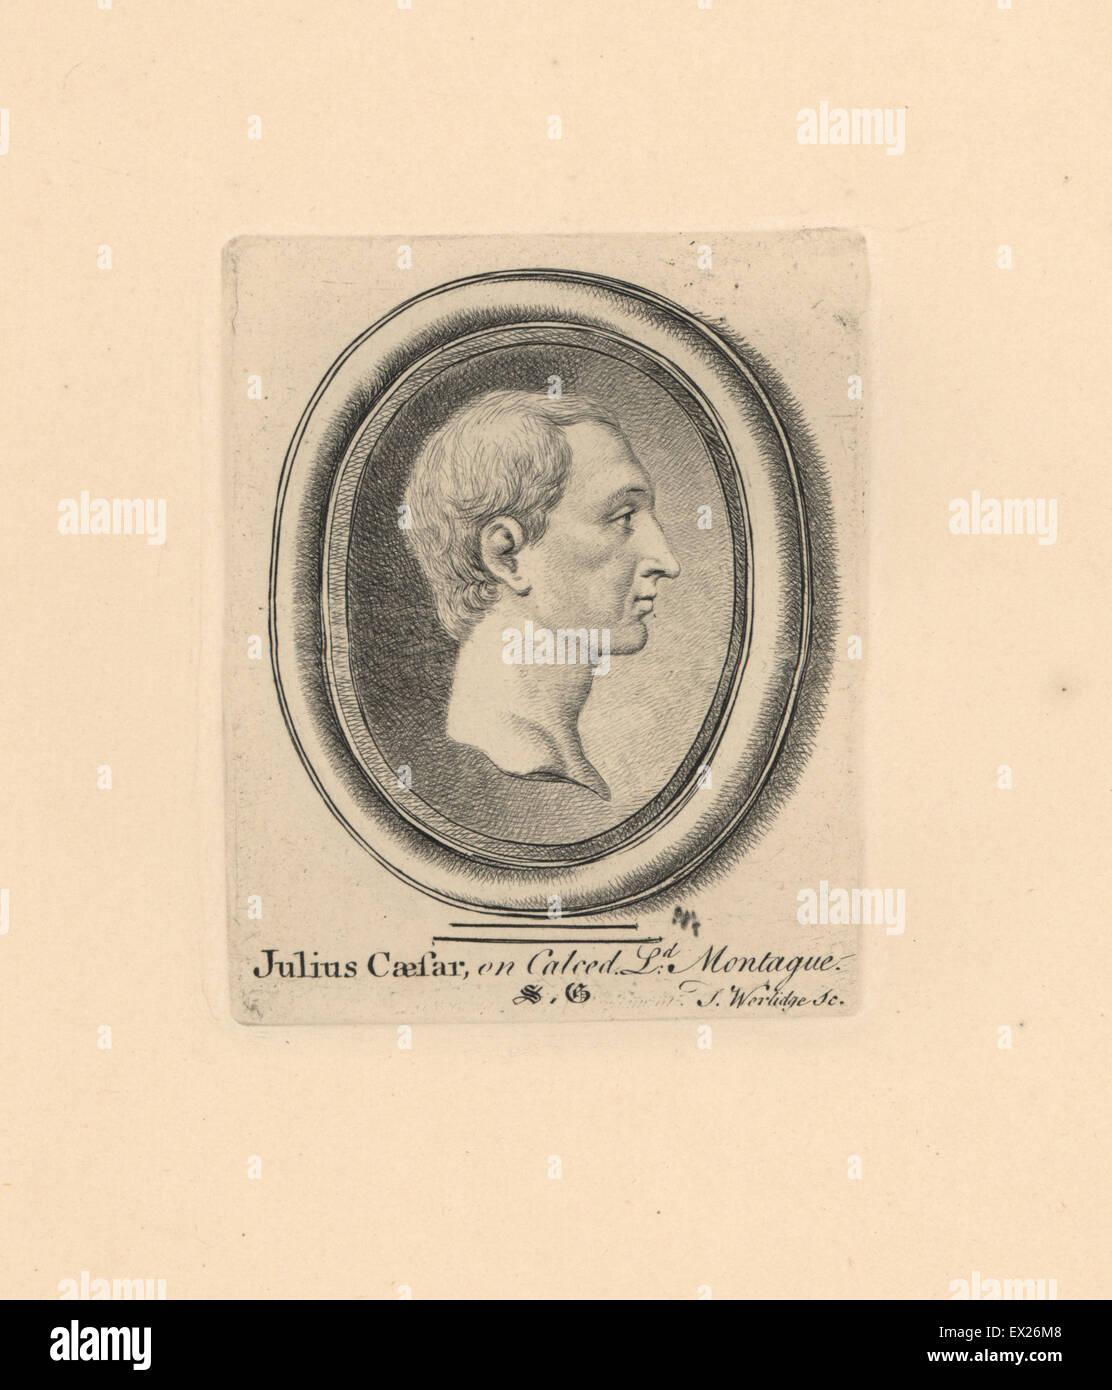 Portrait of Julius Caesar, Roman general and statesman, engraved on chalcedony in the collection of Lord Montague. Copperplate engraving by Thomas Worlidge from James Vallentin's One Hundred and Eight Engravings from Antique Gems, 1863. Stock Photo